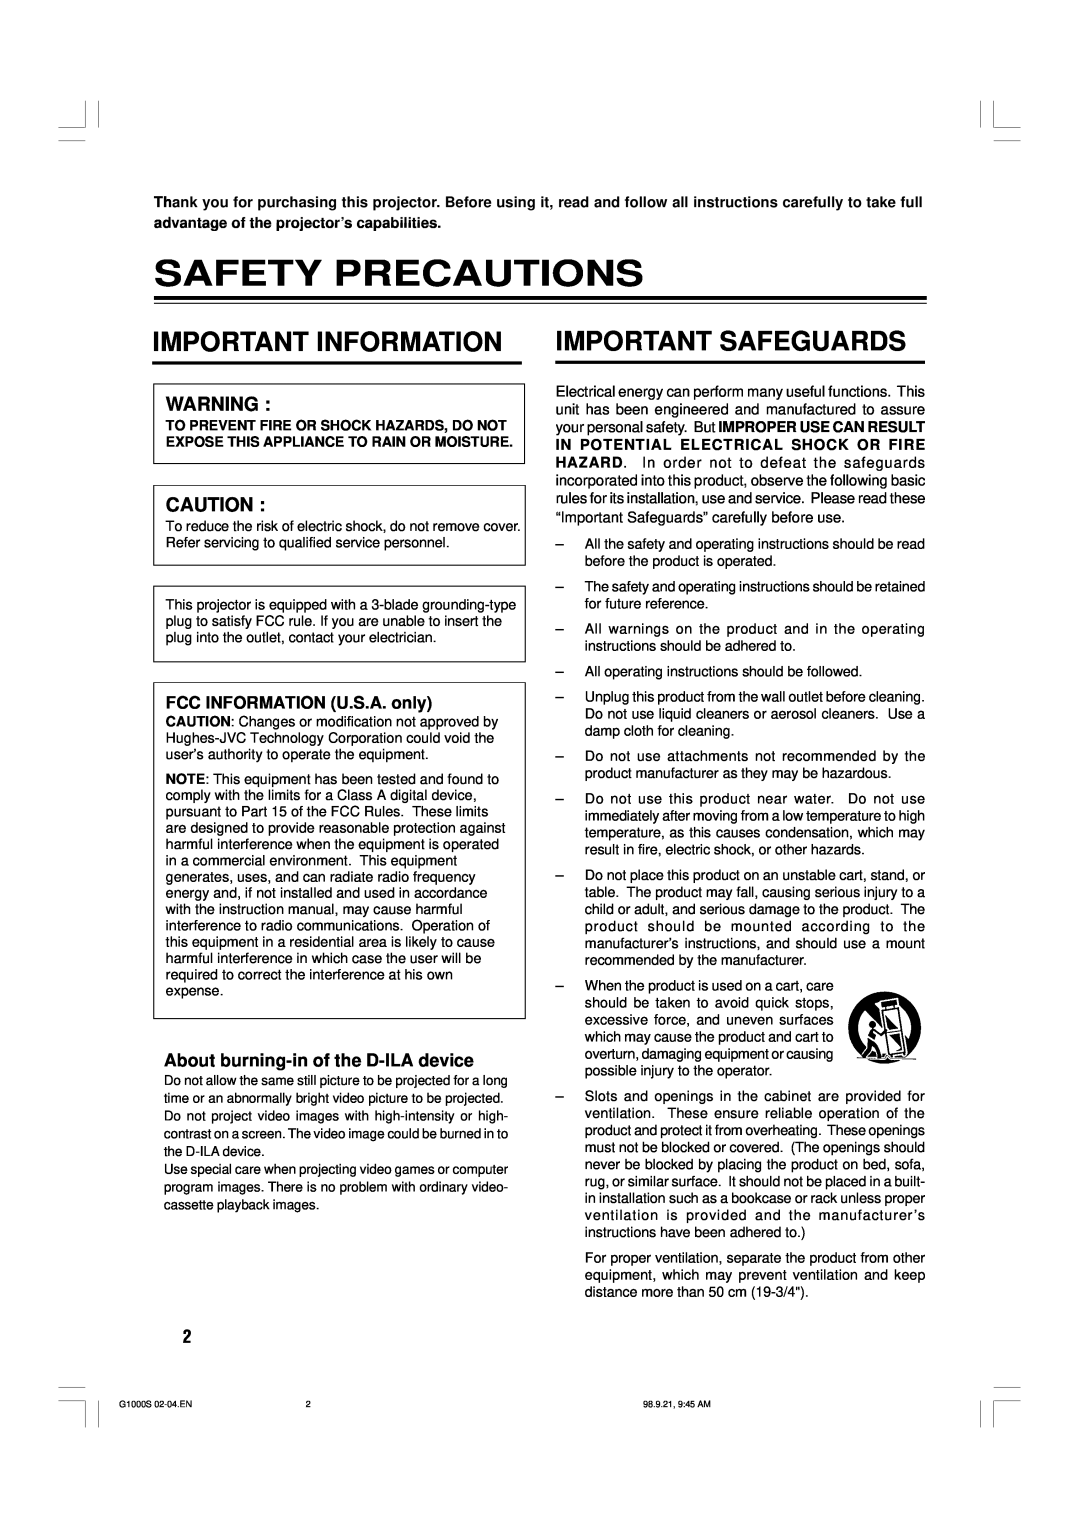 JVC G1000S manual Safety Precautions, Important Information Important Safeguards, About burning-in of the D-ILA device 